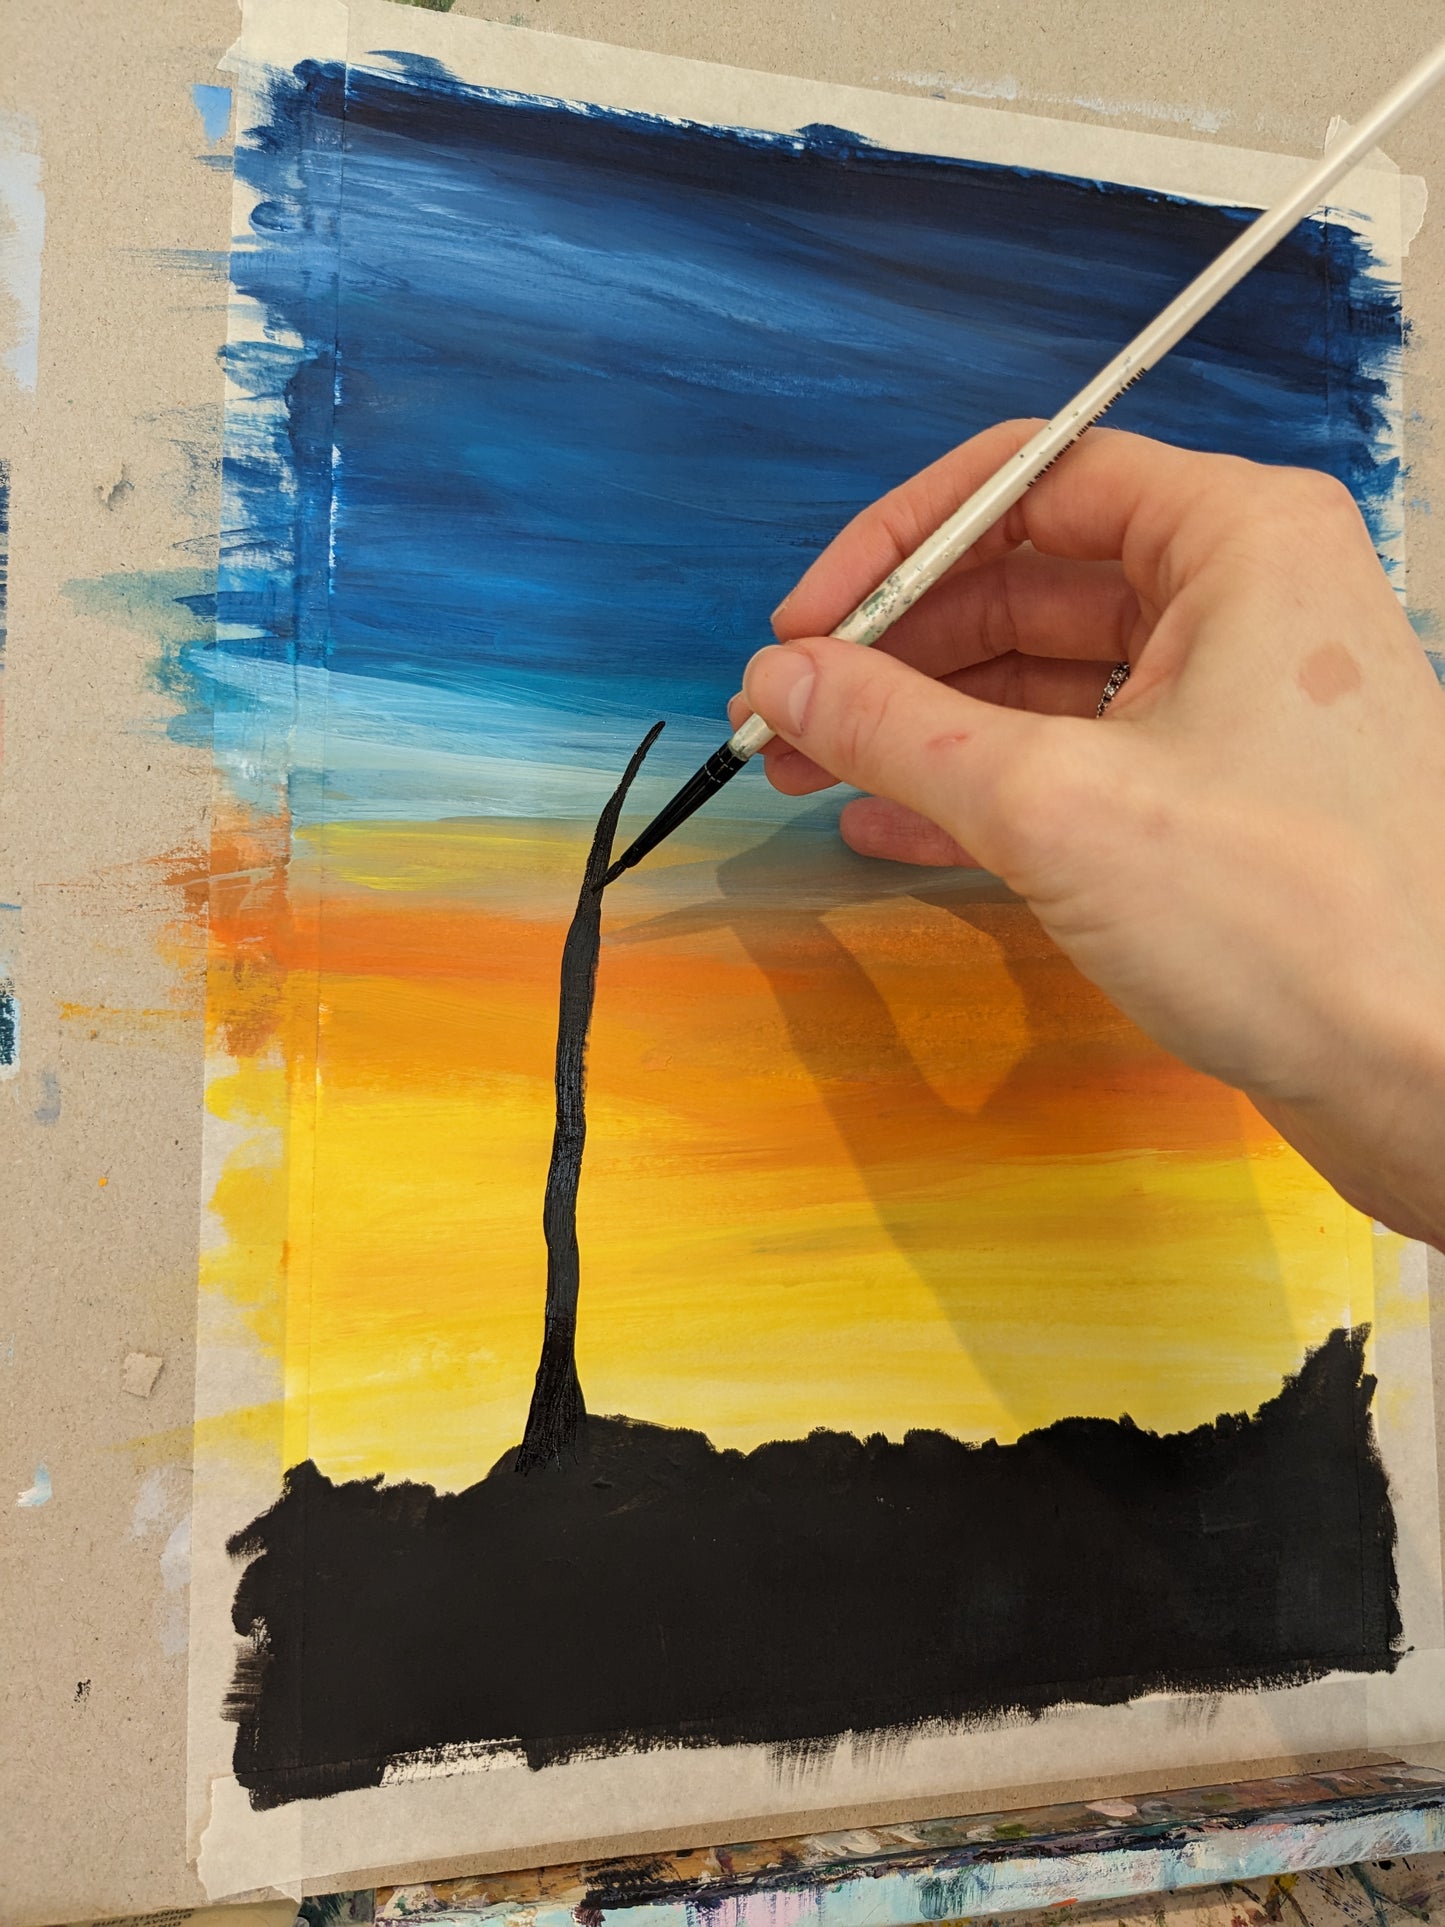 SILHOUETTE SUNSET - Painting Workshop at The Catcher in The Rye Pub, Finchley, London - 27th February 2024, 7.30pm